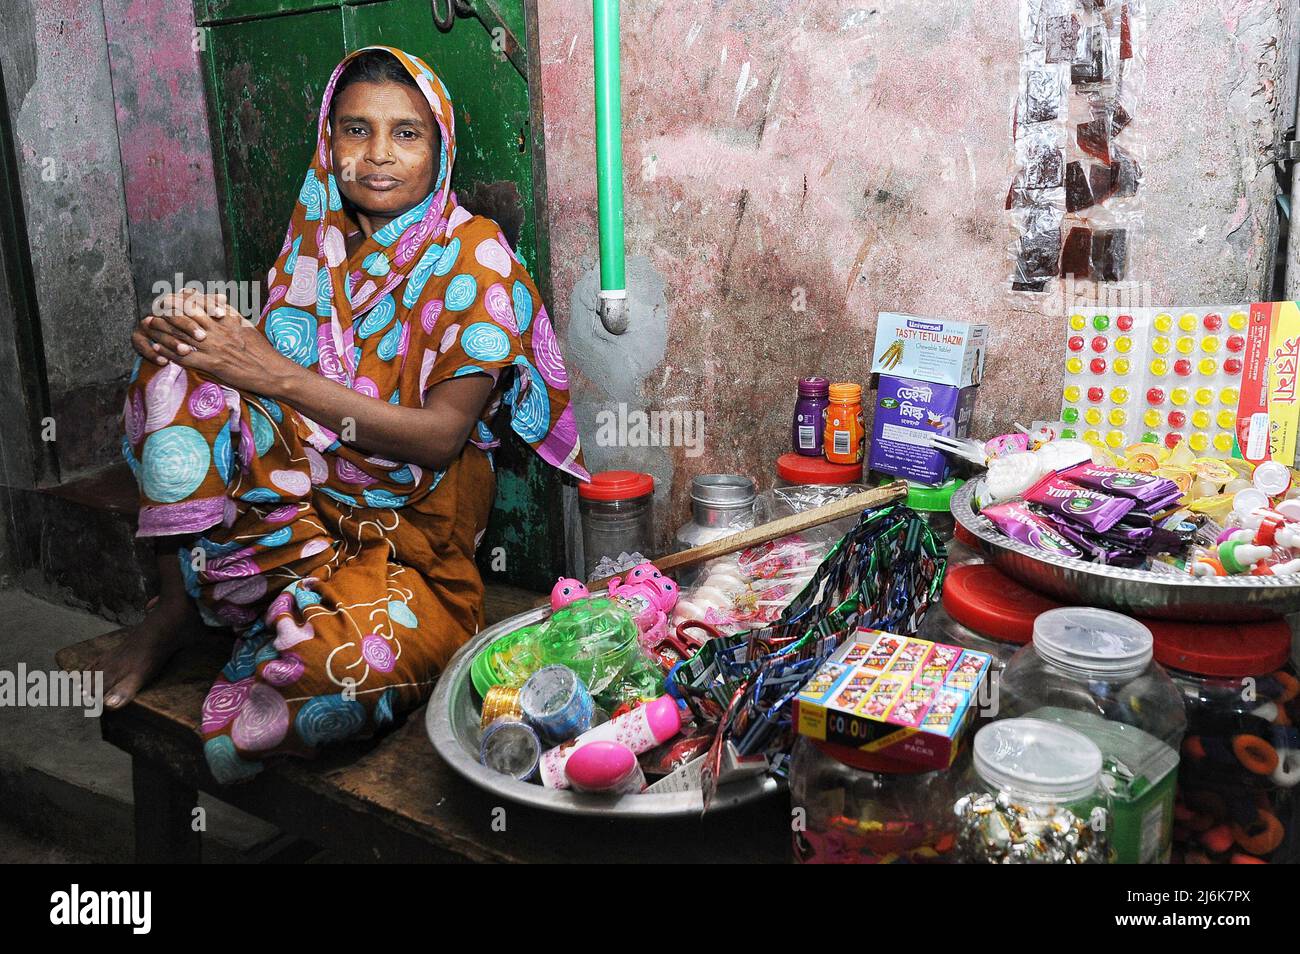 Dhaka, Bangladesh. 2nd May 2022. People at the Bihari Camp making preparations for Eid al-Fitr. Also known as the Geneva camp, it has about 50 thousand Urdu speaking Indian & Pakistani people living at the camp. The Bihari minority remain some of Bangladesh’s most marginalized communities. Credit: Majority World CIC/Alamy Live News Stock Photo